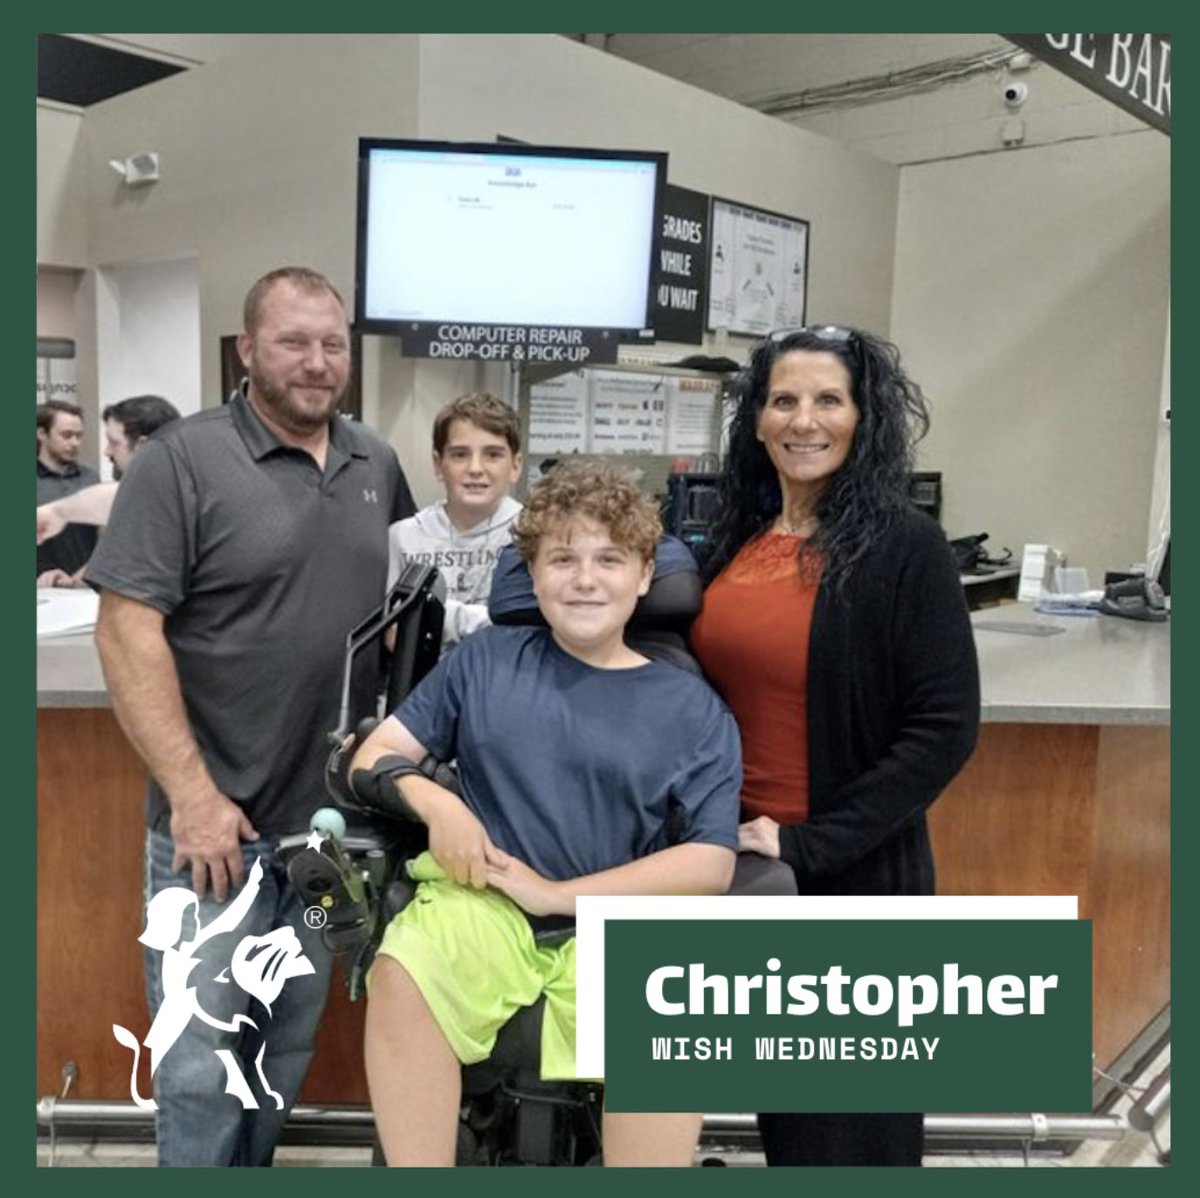 Christopher's wish was granted for his own gaming computer. The wish was granted through our Long Island Chapter and with the help of Micro Center of Westbury. Christopher got to add the finishing touches. #WishWednesday @Microcenter Help Grant a Wish: martylyonsfoundation.org/donate-today